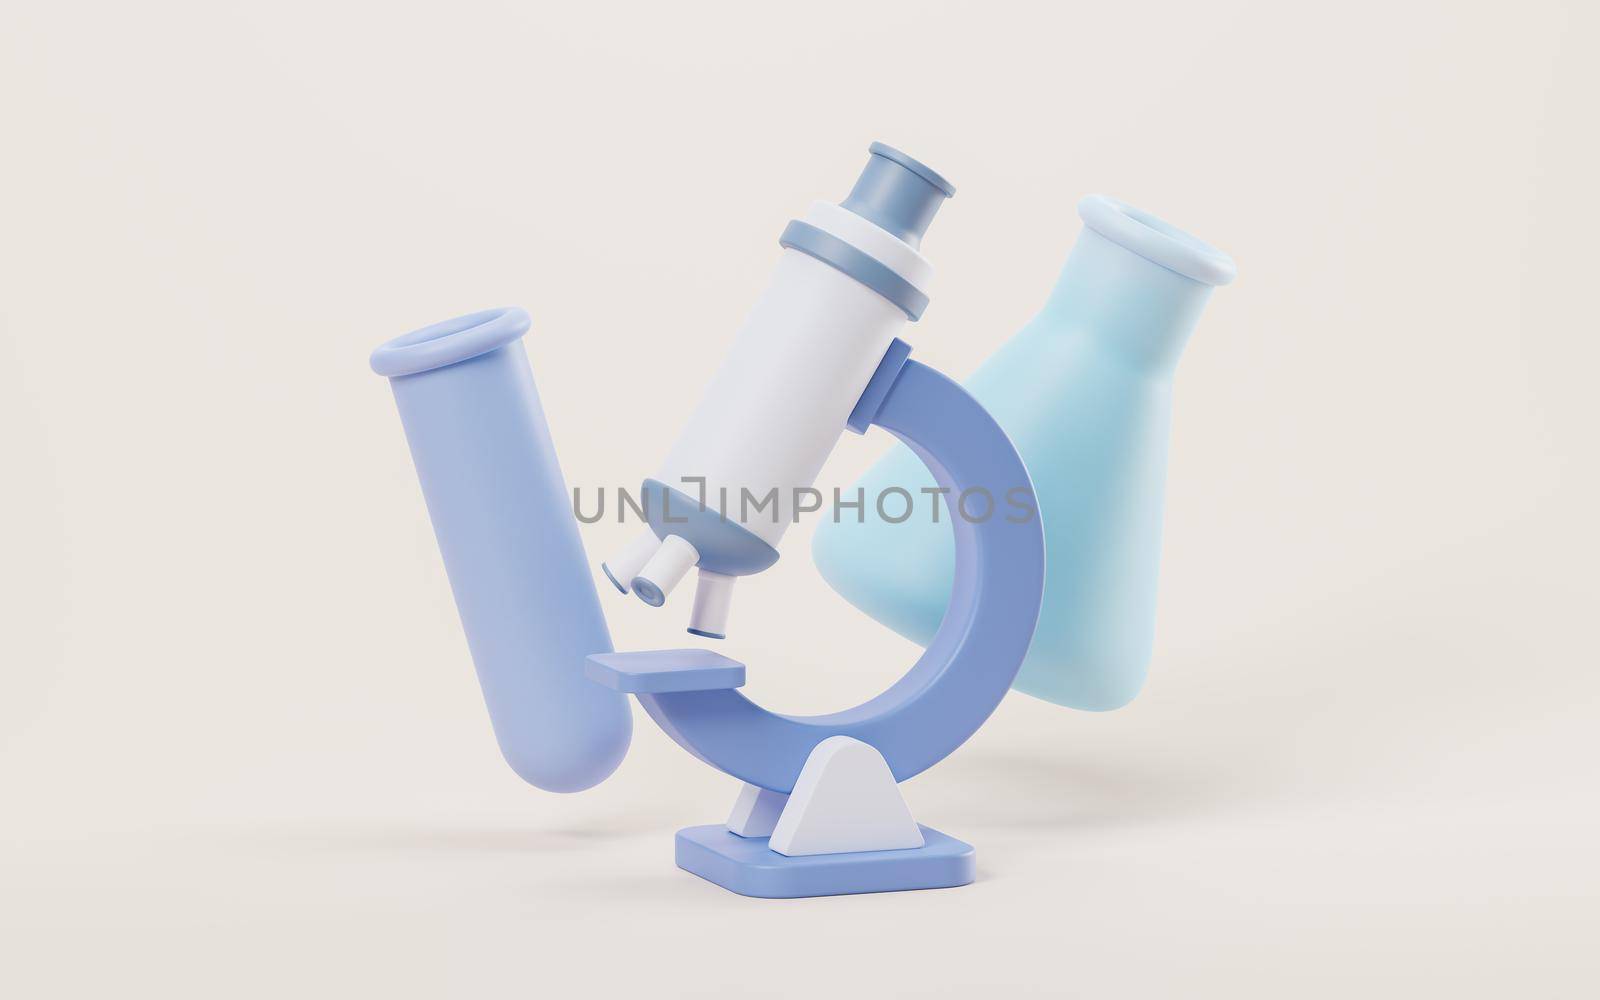 3D cartoon style microscope and chemical vessel, 3d rendering. by vinkfan